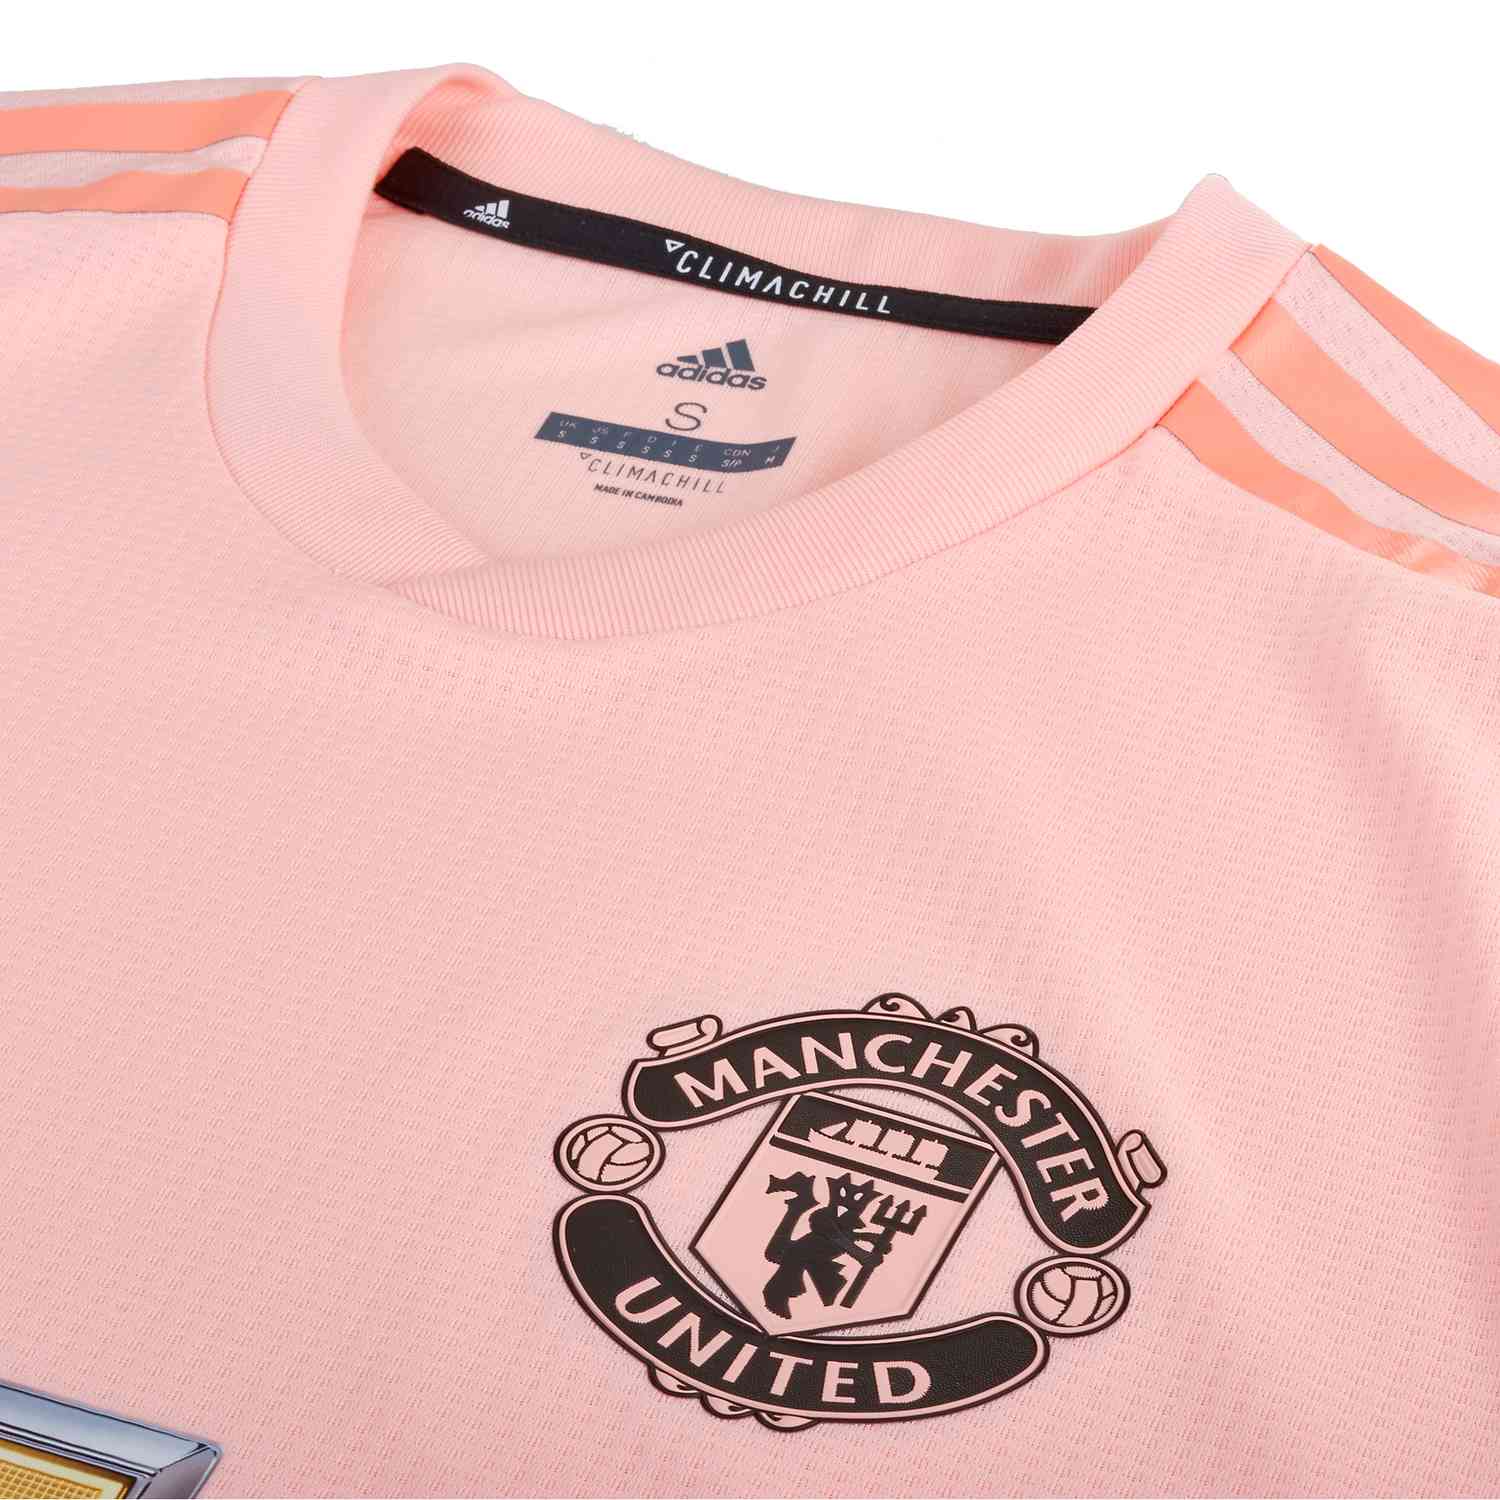 Manchesterunited and adidasfootball Manchester, United Kingdom Lejoshua_cox  Sh Bussin? Dreamybull FC 127 Reply See translation View 2 more replies View  shop Liked by adidasfootball and 177,181 others mmanchesterunited This Kind  of Love